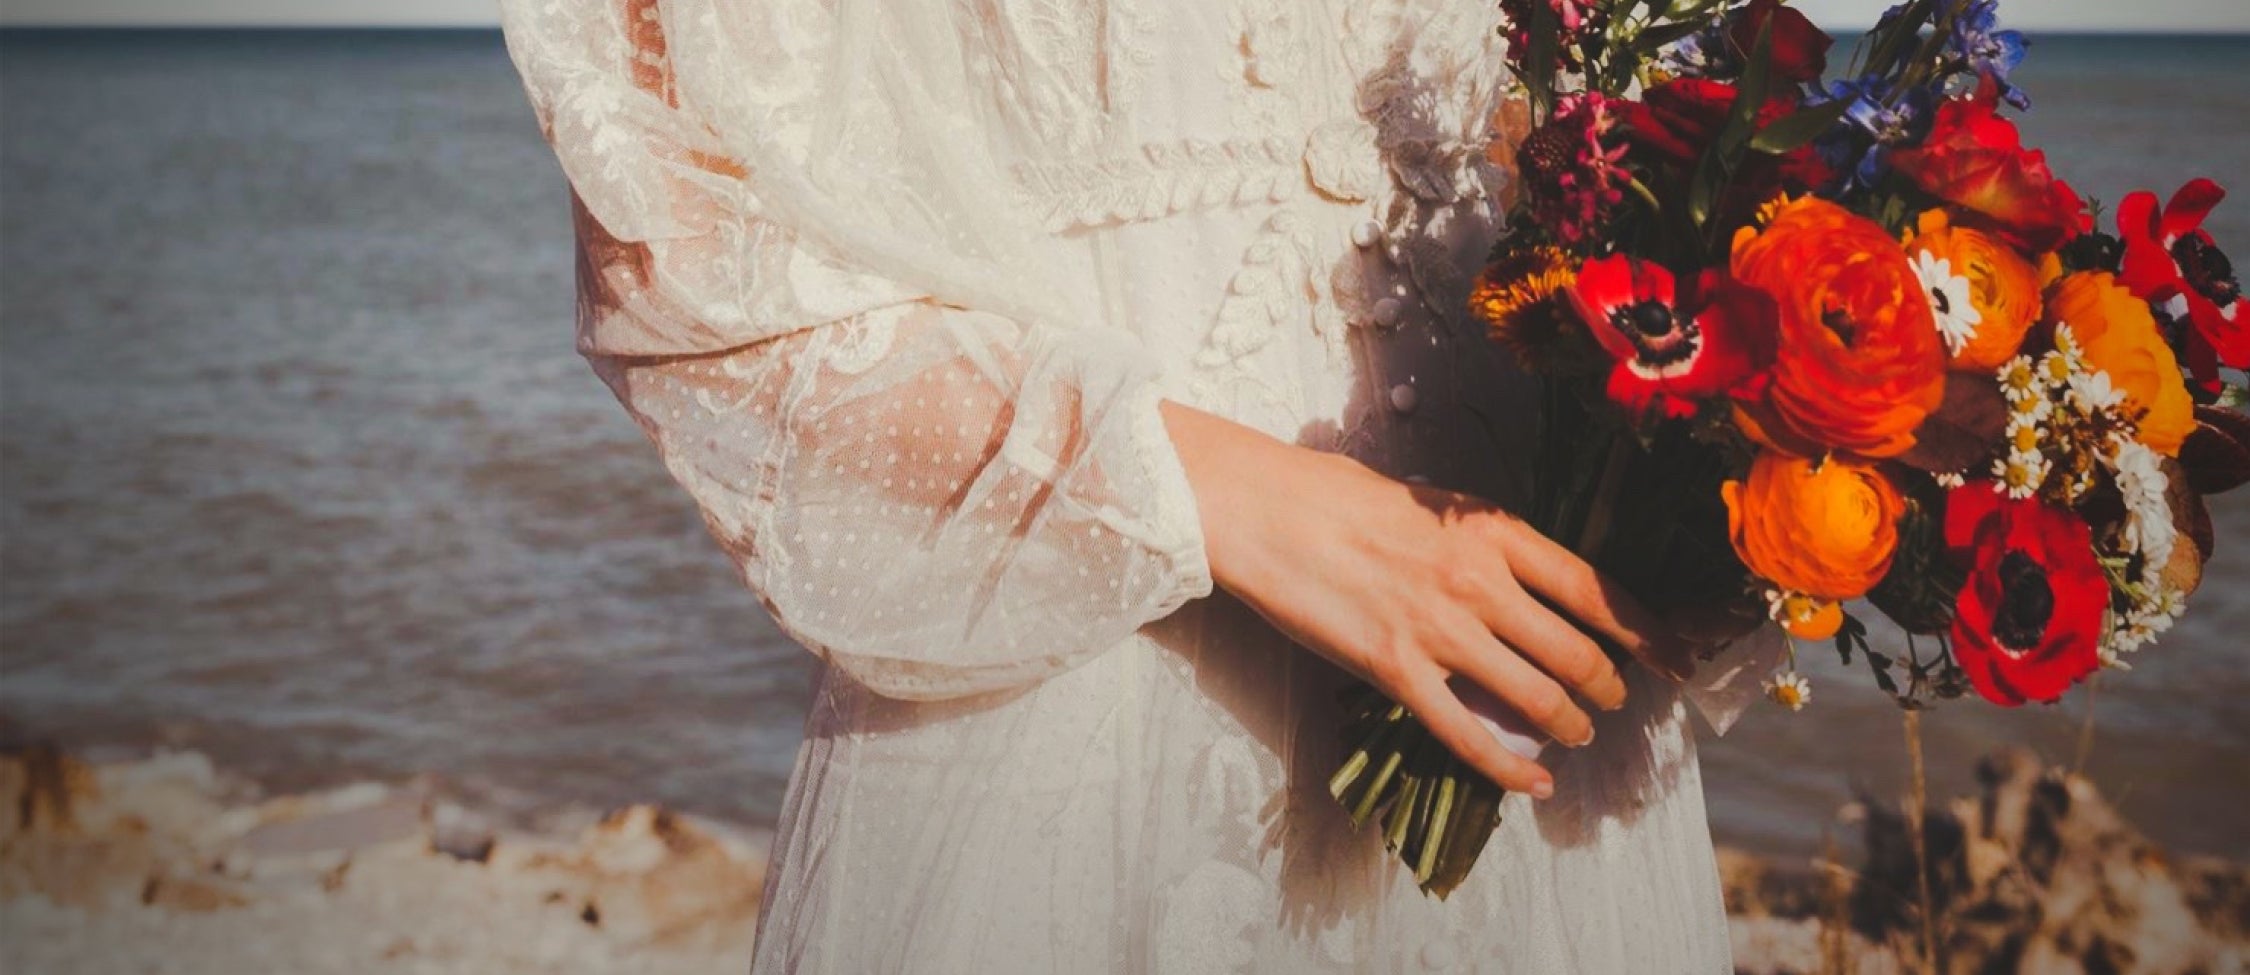 A close up of a bride in a long sleeved vintage lace dress holding a colorful bouquet of flowers with Lake Michigan in the background